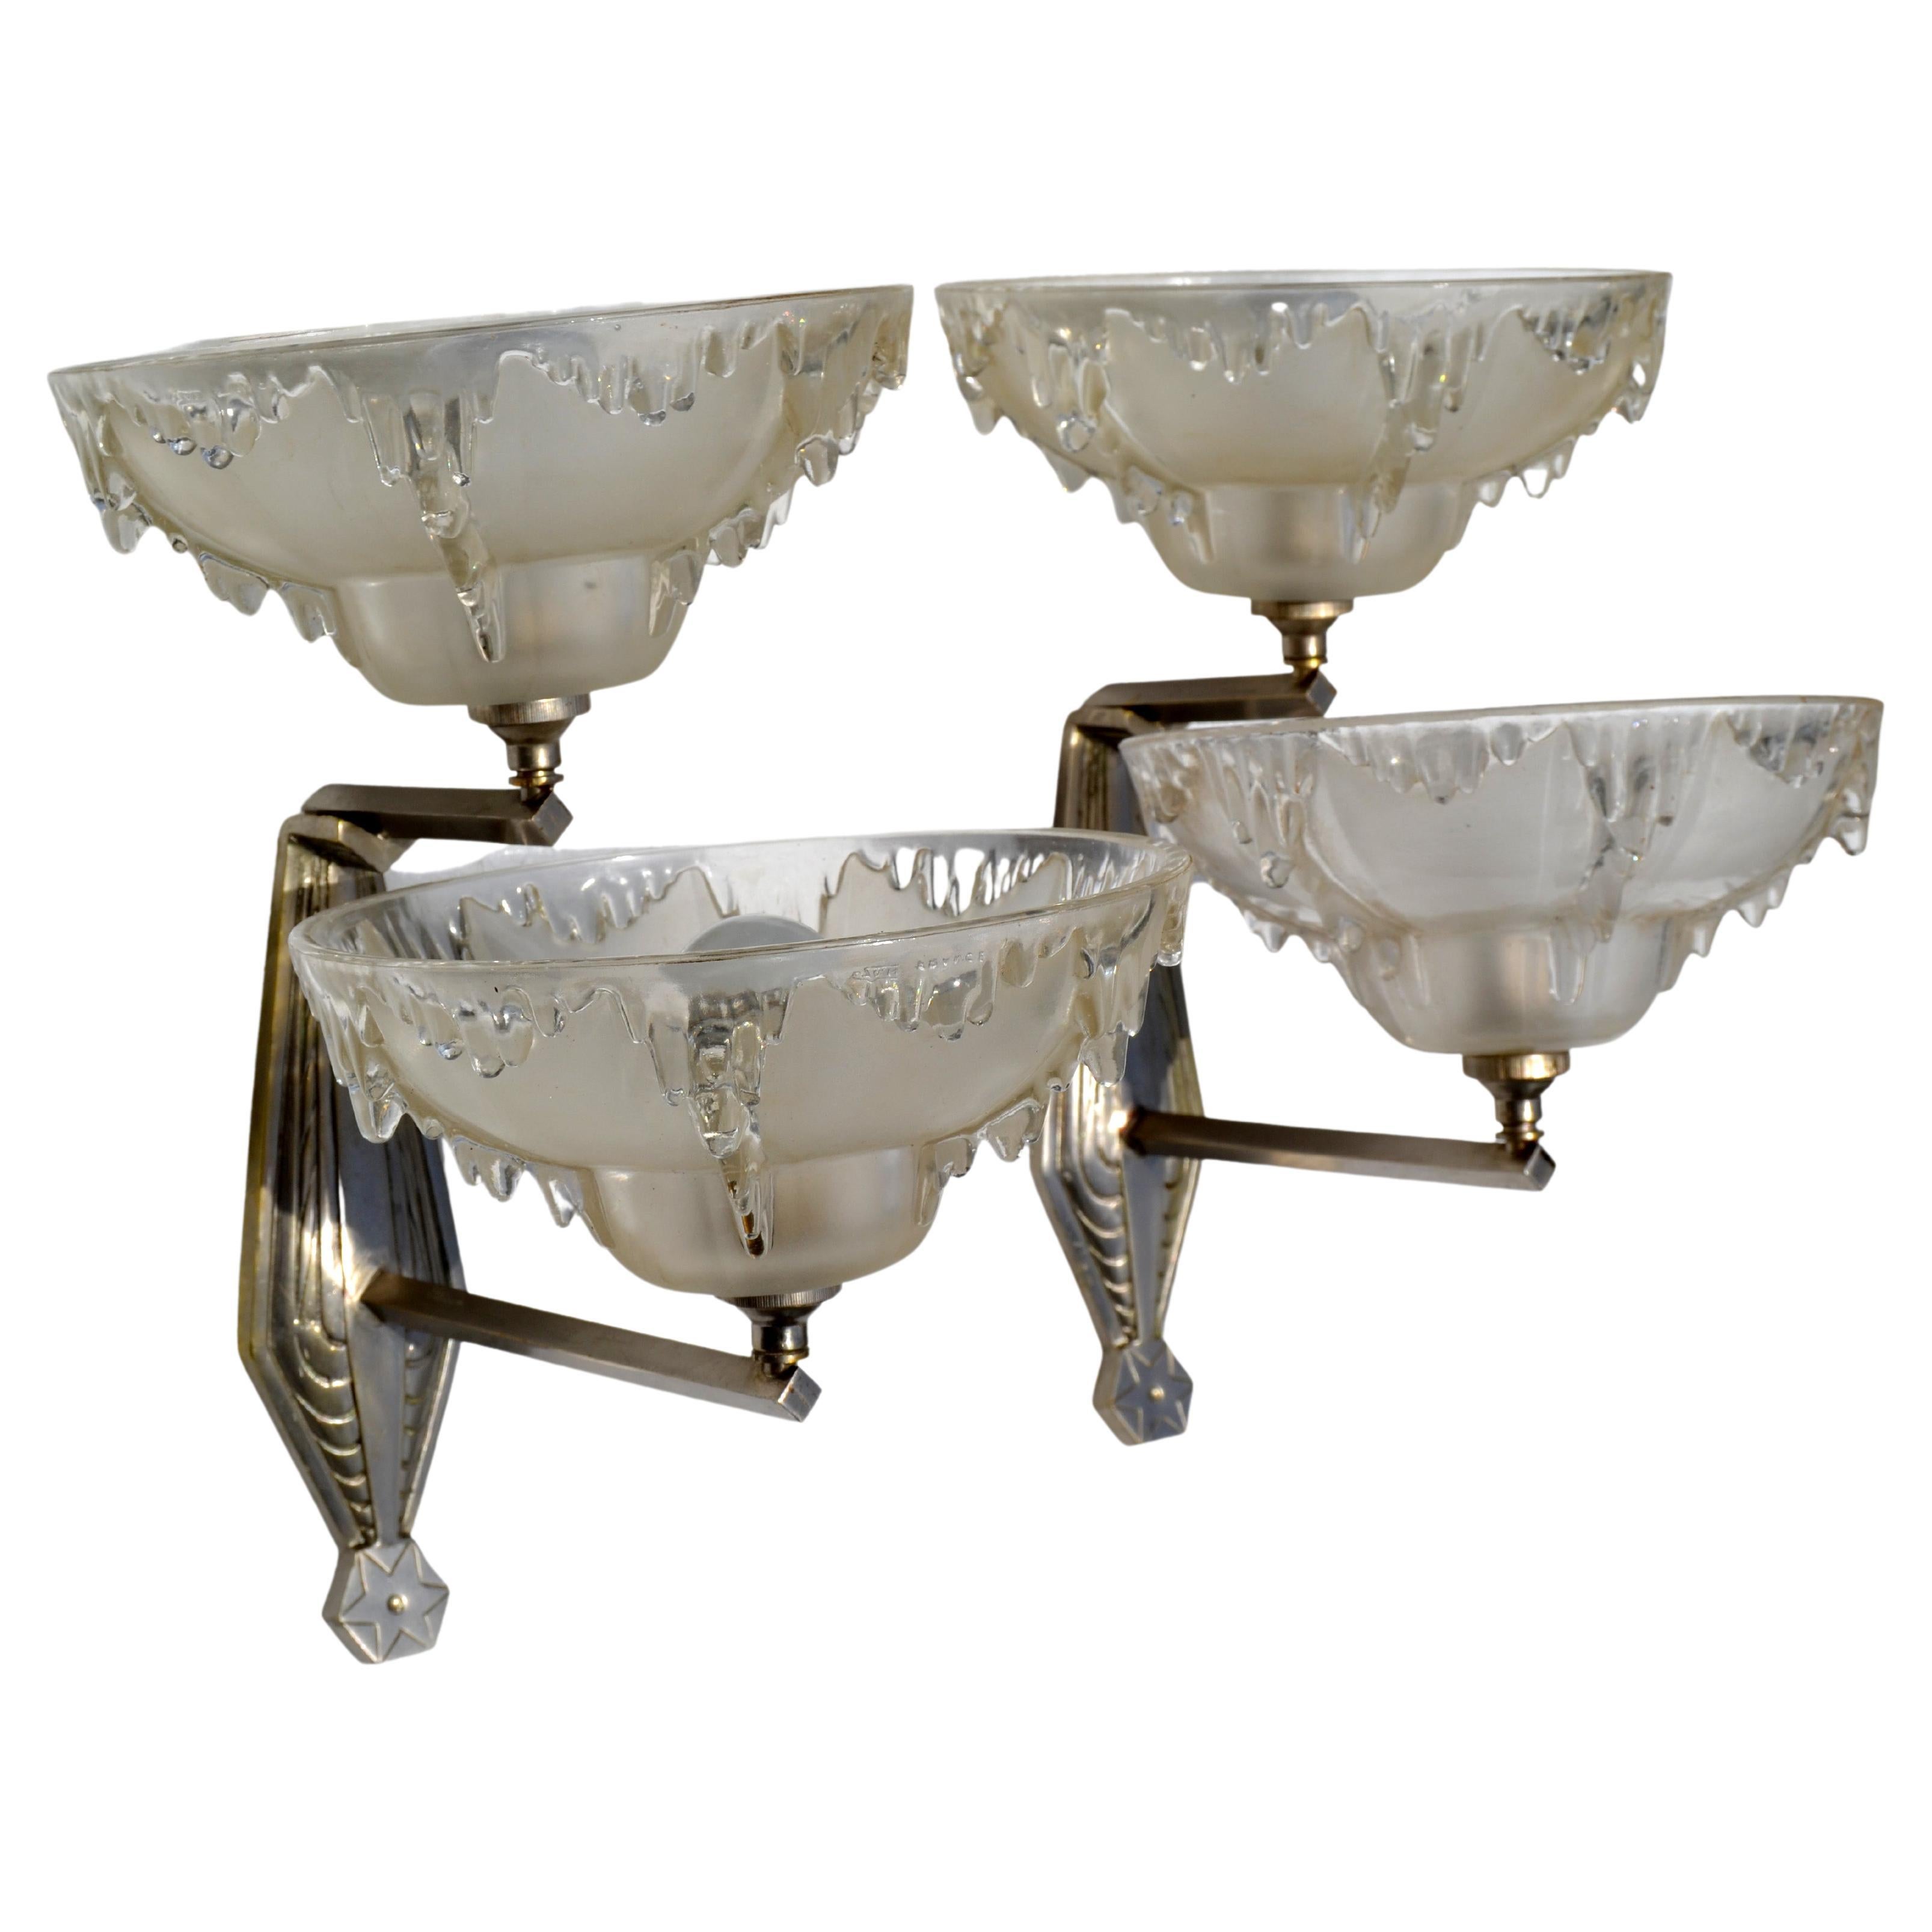 Superb pair of clear blown Murano glass and brass wall sconces 
Original European wiring and in working condition. Each Sconce takes two special light bulbs 40 watt max. as shown in pictures. 
Measurements:
Murano Cups: Diameter 8 x 6 inches